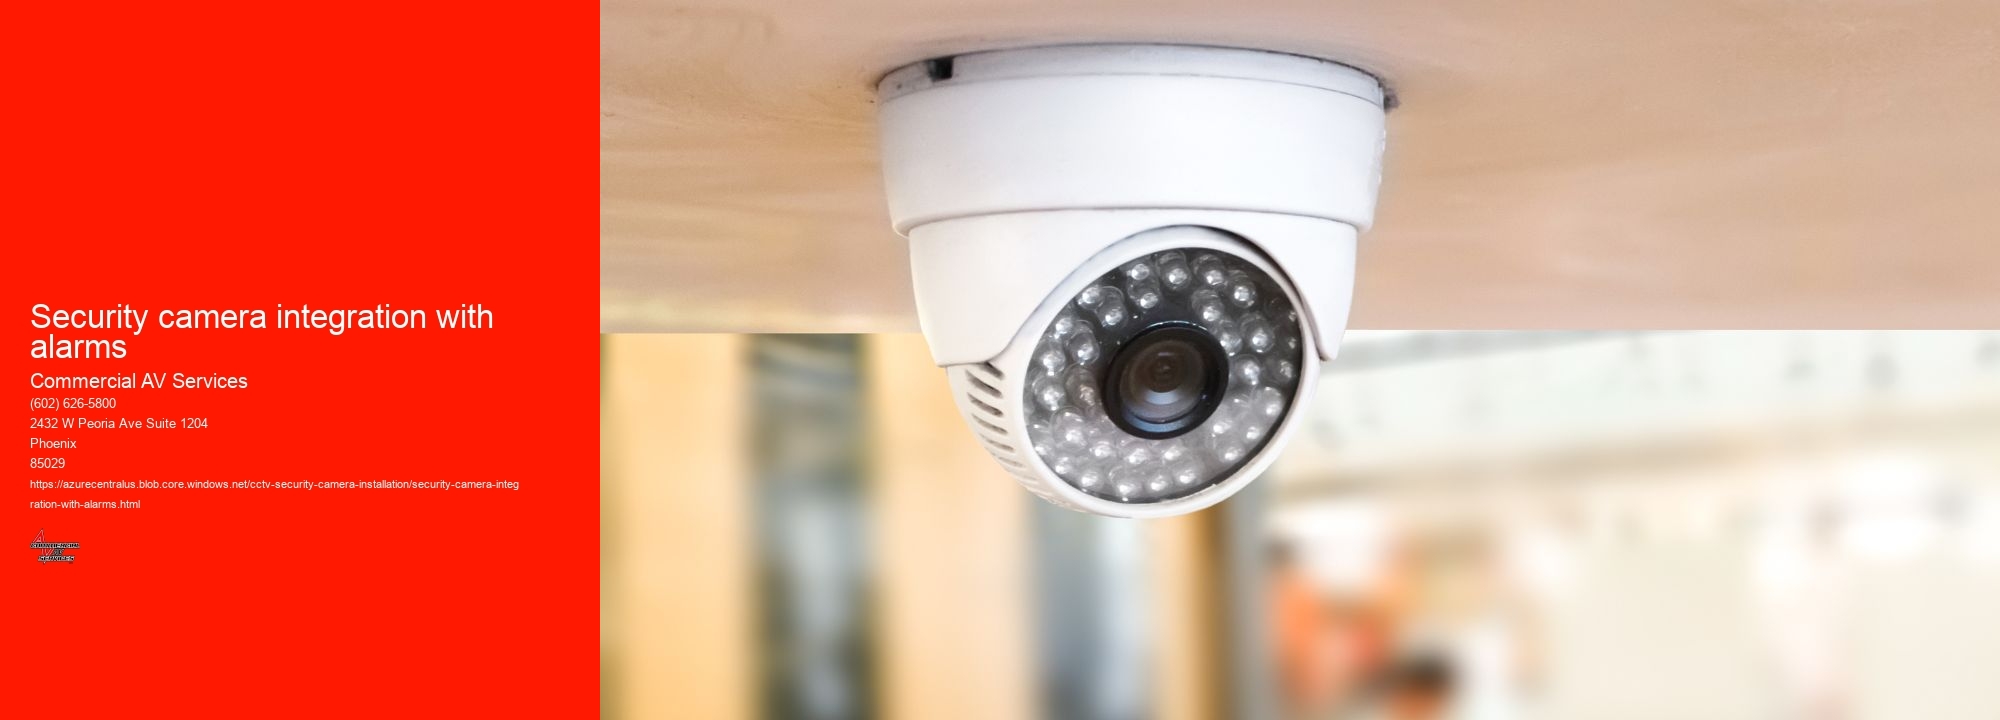 Security camera integration with alarms